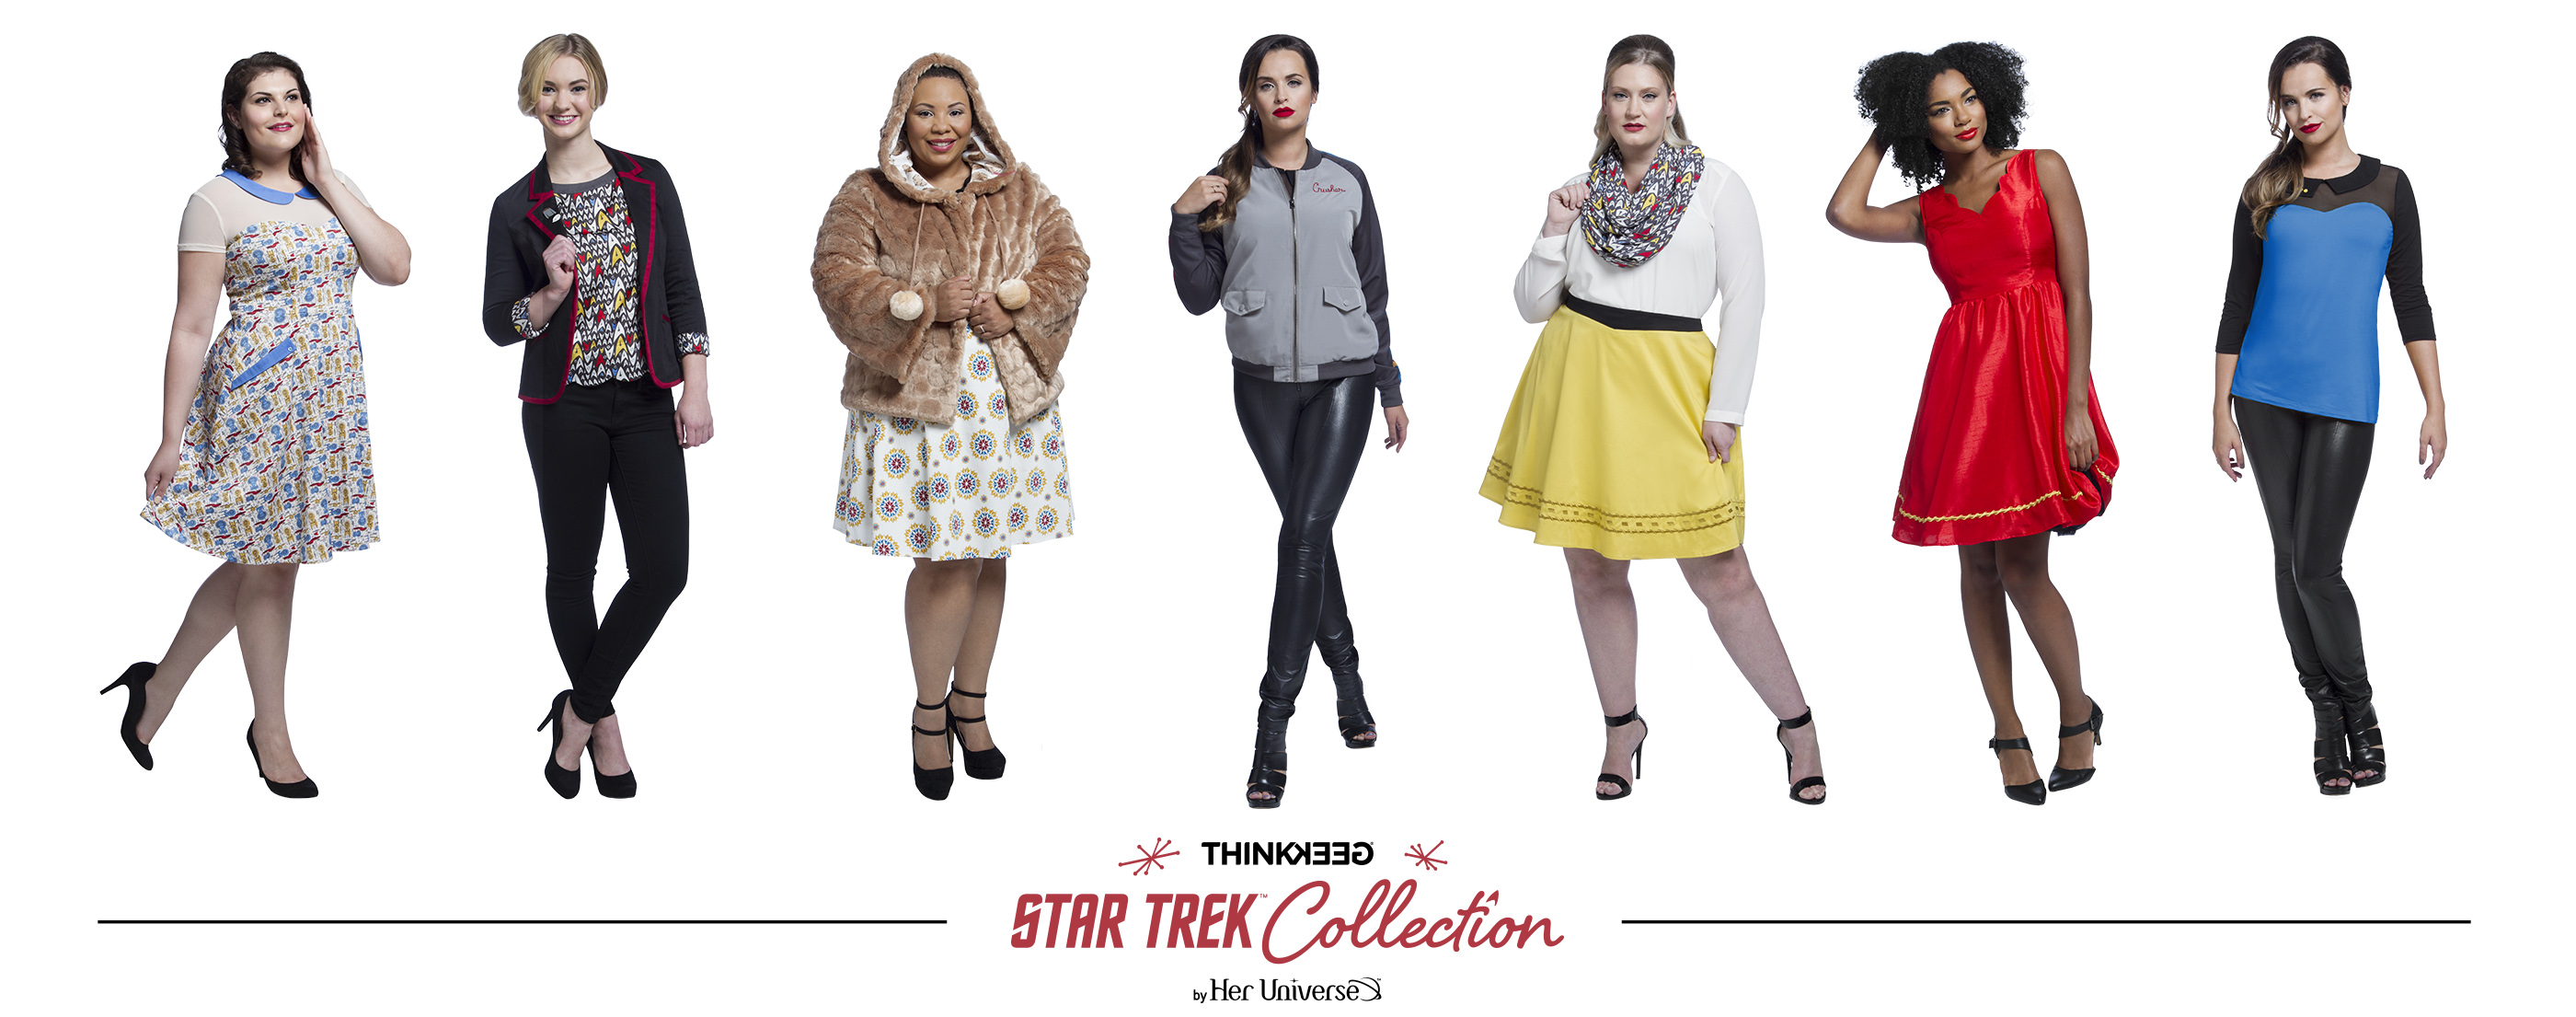 To celebrate Star Trek's 50th anniversary, ThinkGeek and Her Universe have teamed up to create the ultimate Star Trek fashion collection for the holidays.